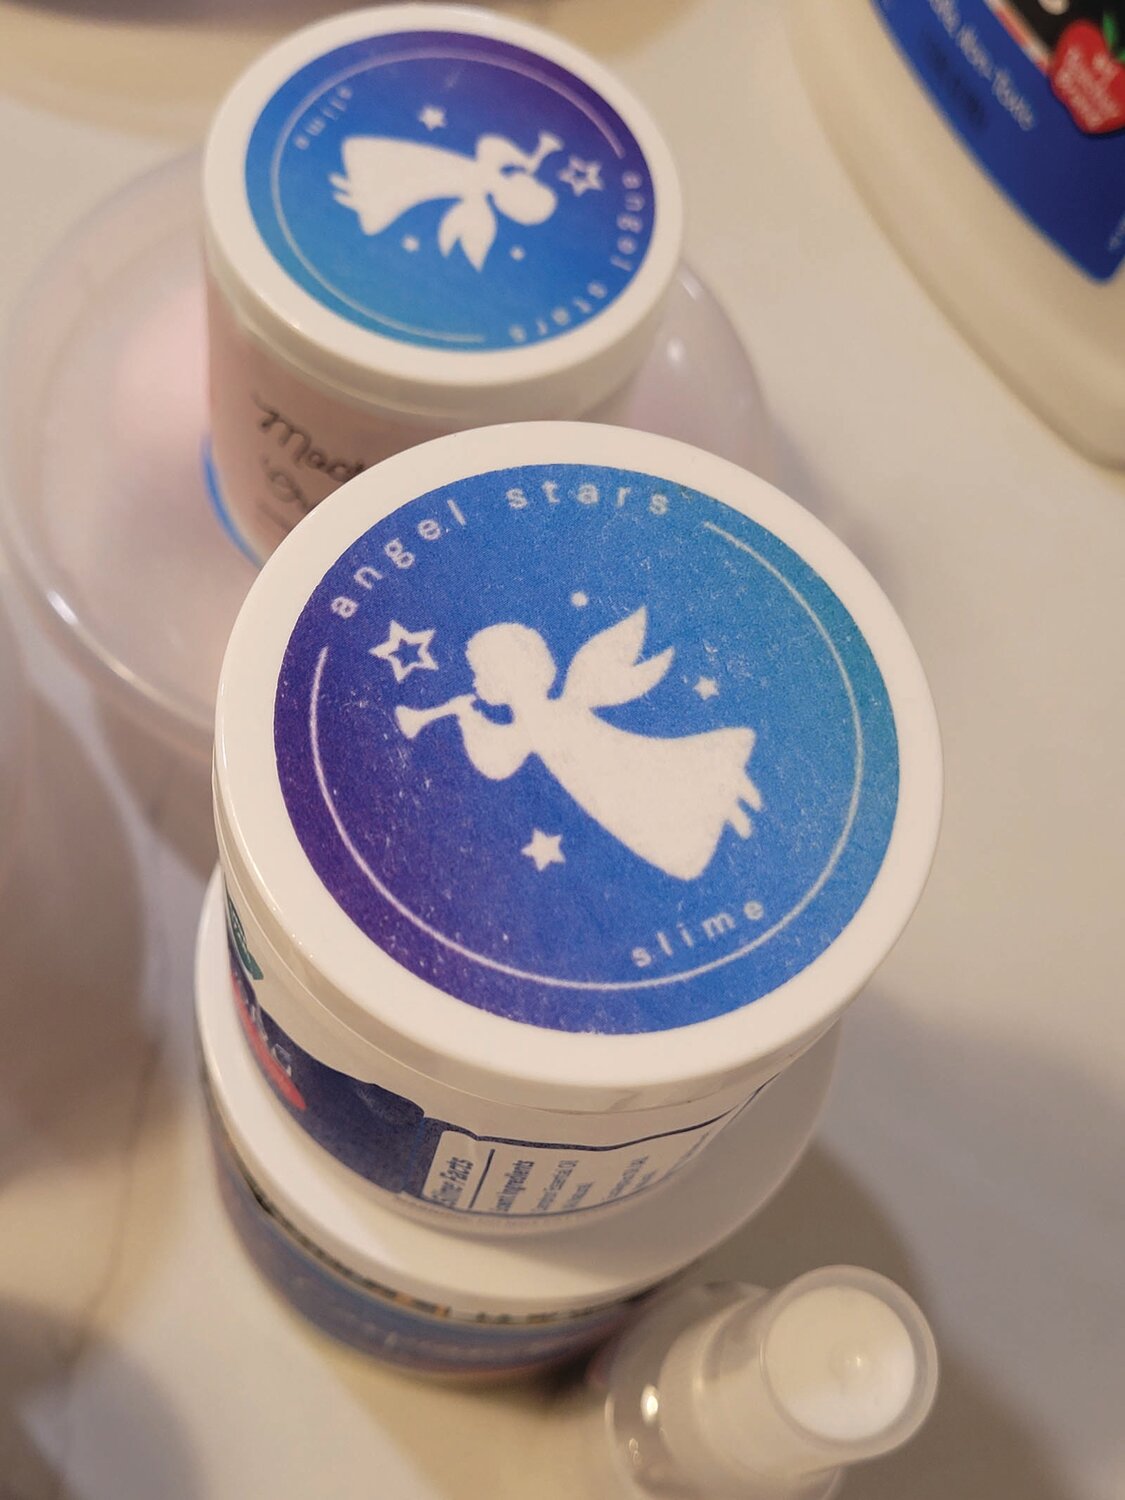 ONE-KID ASSEMBLY LINE: Penelope Santos loves making slime. Now she hopes to share it with others, selling her product online. She designed the logo (shown here) that appears on each container of Angel Stars Slime.